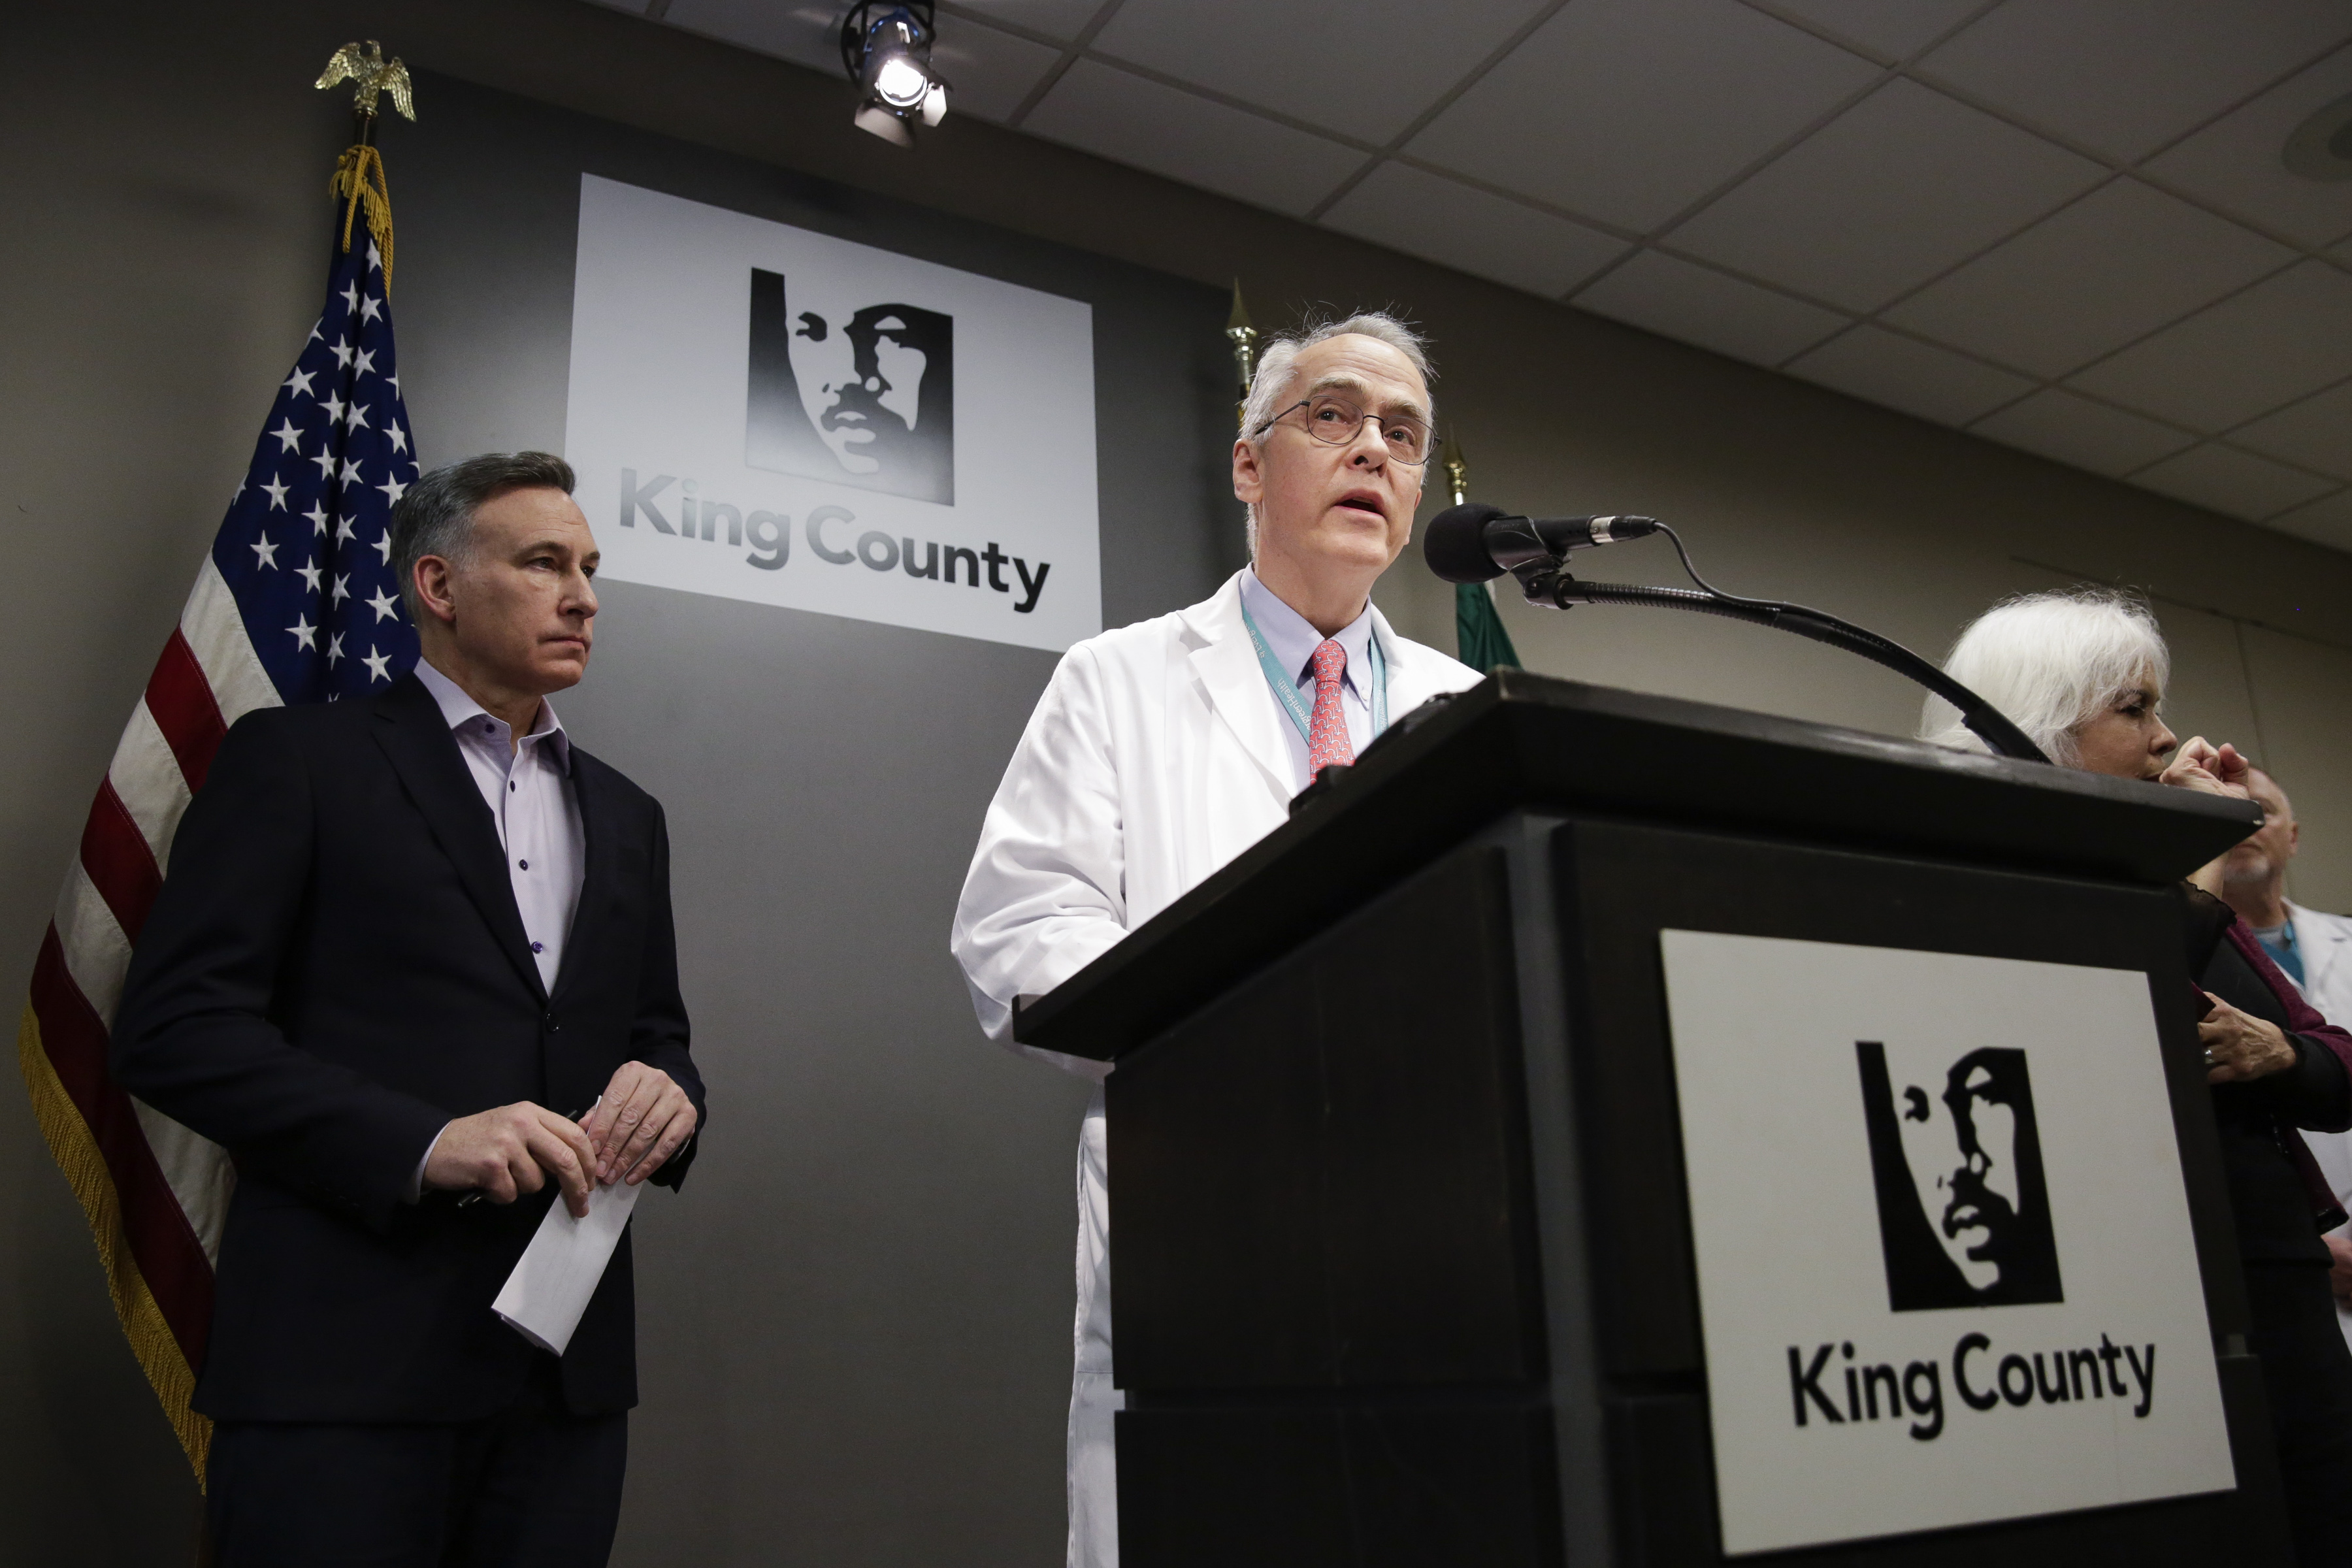 Frank Riedo, Medical Director of Infection Control at Evergreen Health Hospital, speaks at a press conference following the first death of a King County resident due to novel coronavirus on February 29. A second death was confirmed in King County on March 1.